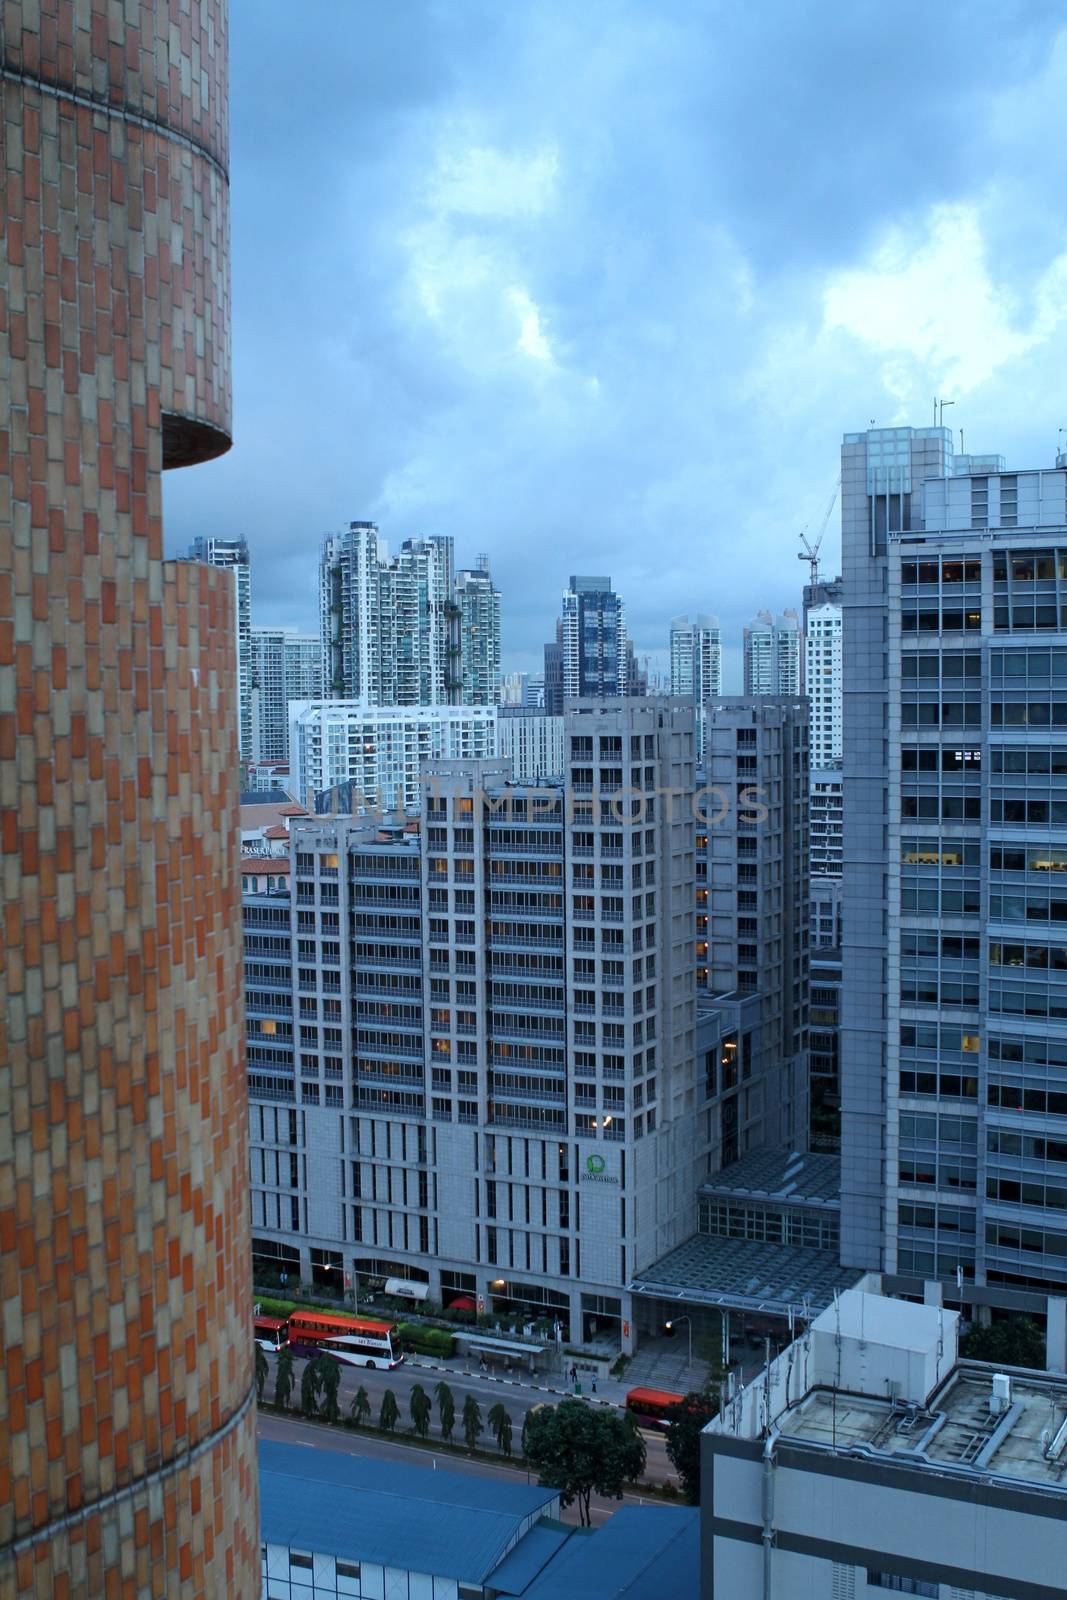 An asian city scape with overcast conditions